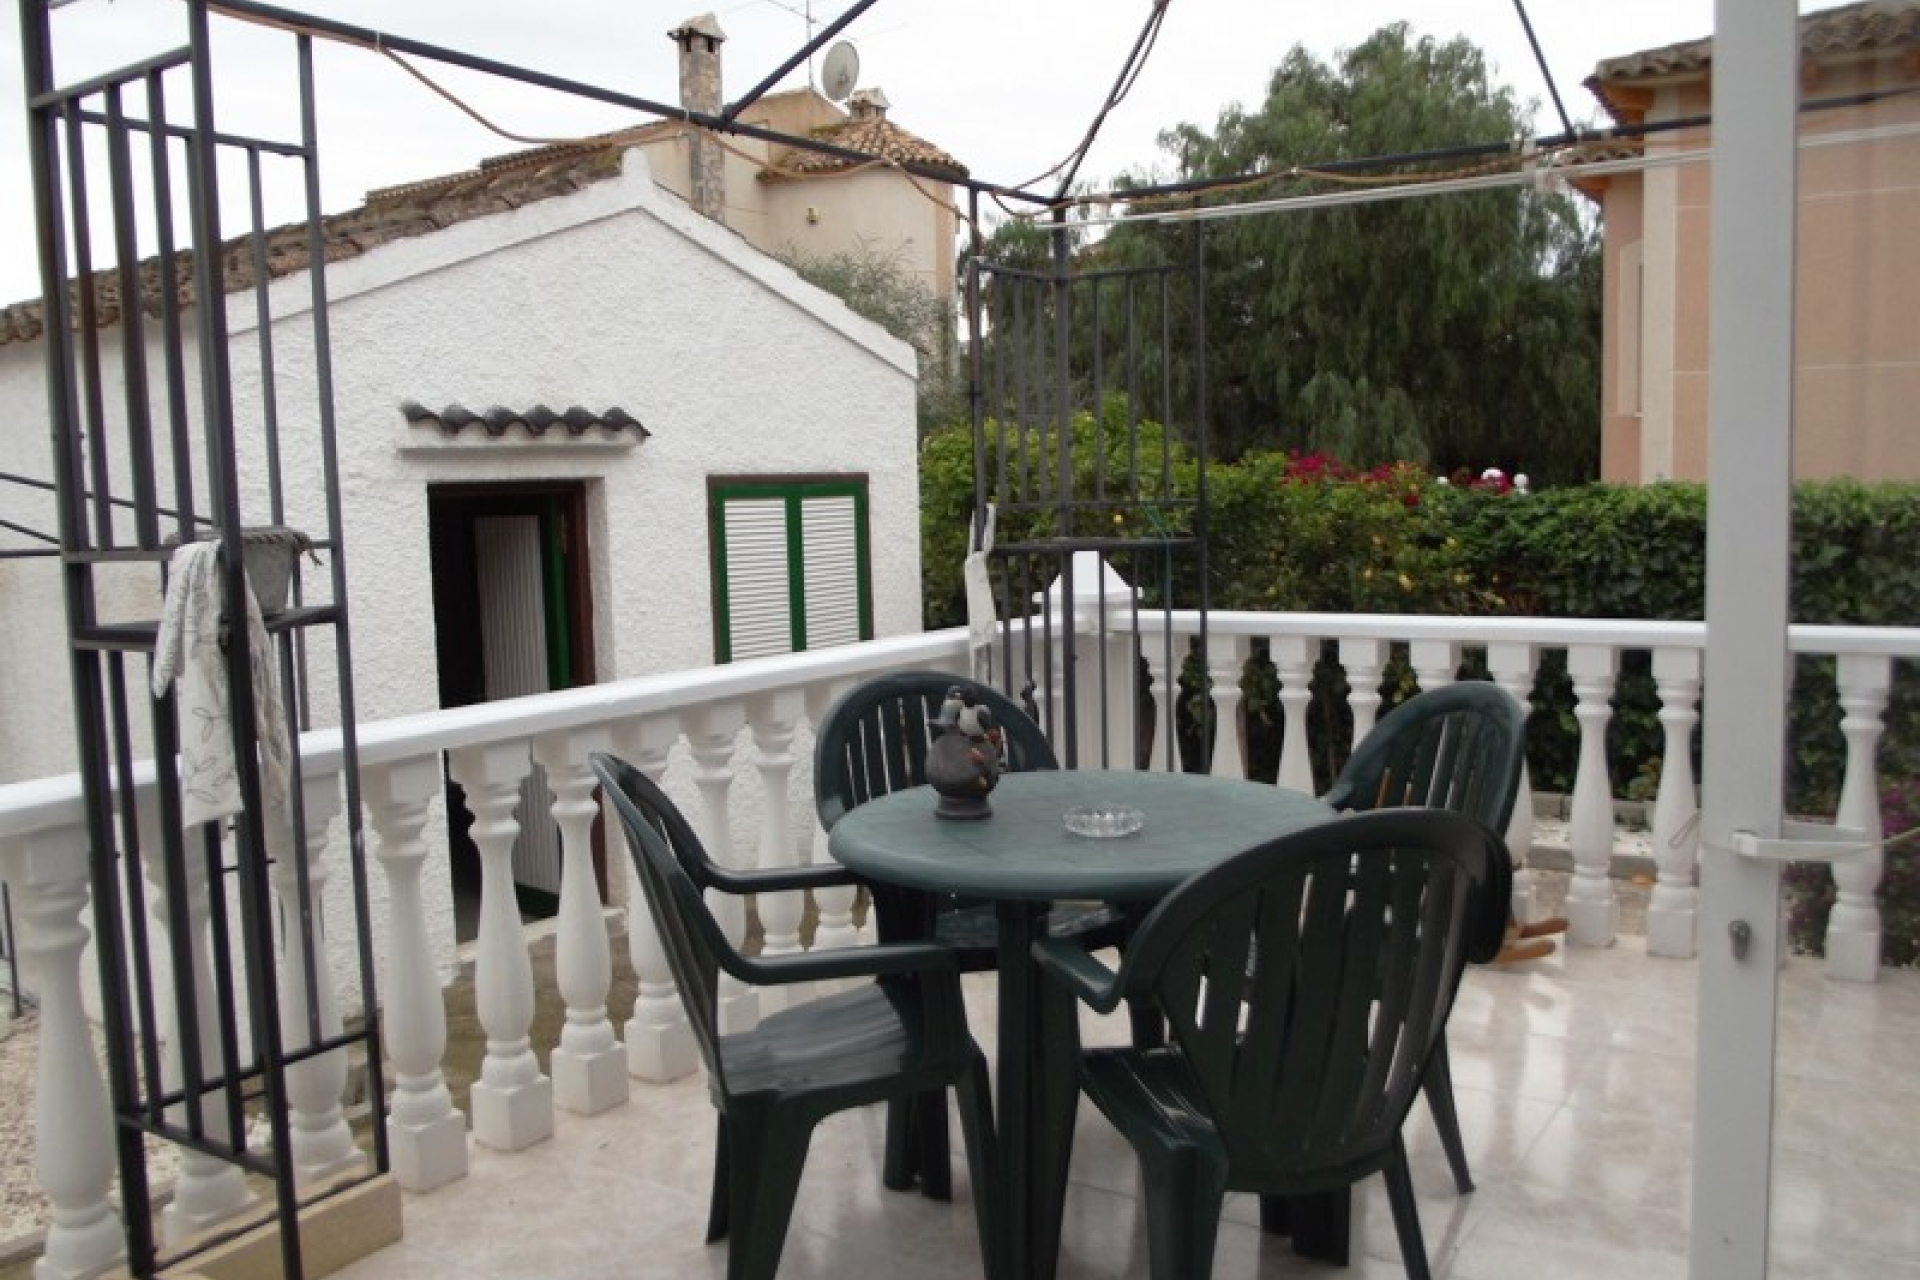 Cheap, property bargain for sale on Spains Orihuela Costa and Costa Blanca for sale near Orihuela.